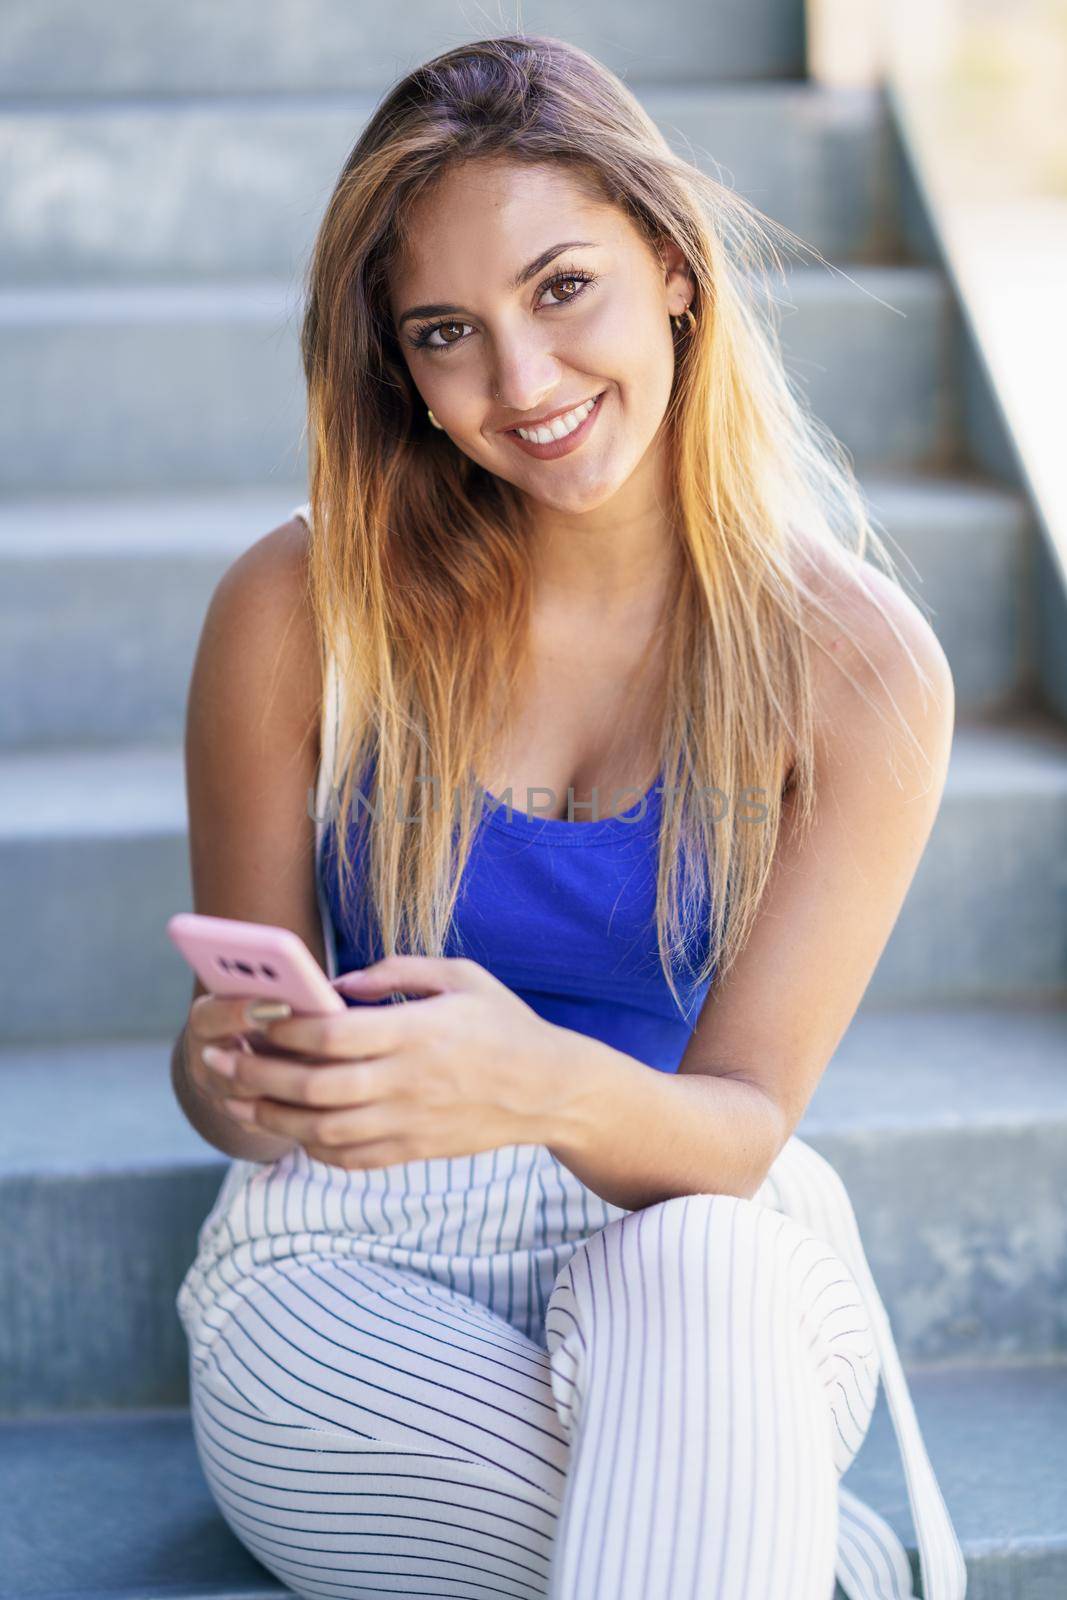 Girl using a touchscreen smartphone wearing casual clothes by javiindy